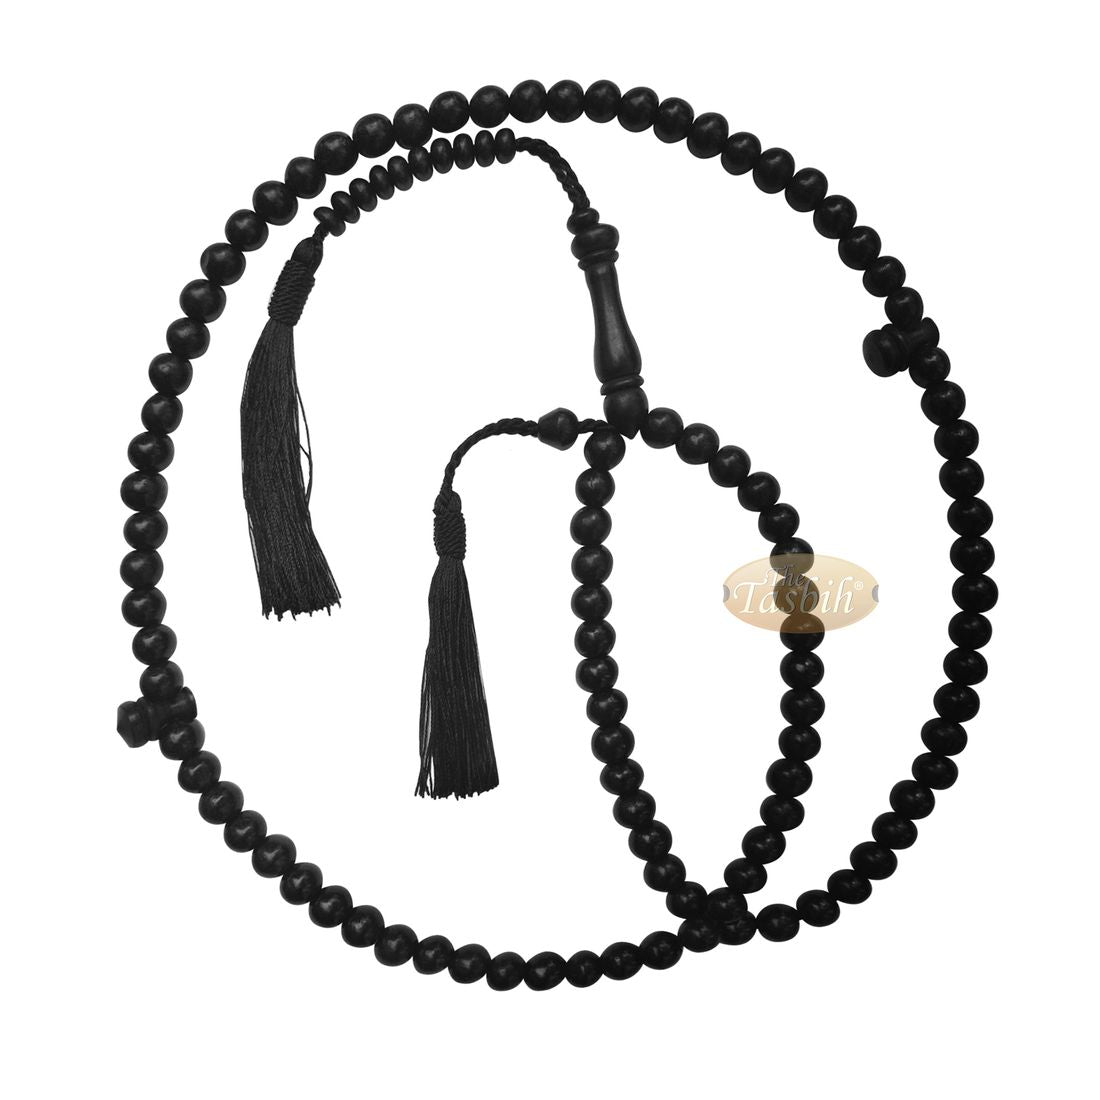 Natural Handcrafted 9mm Black Beads Wooden Tasbih 99-beads with Black Tassel